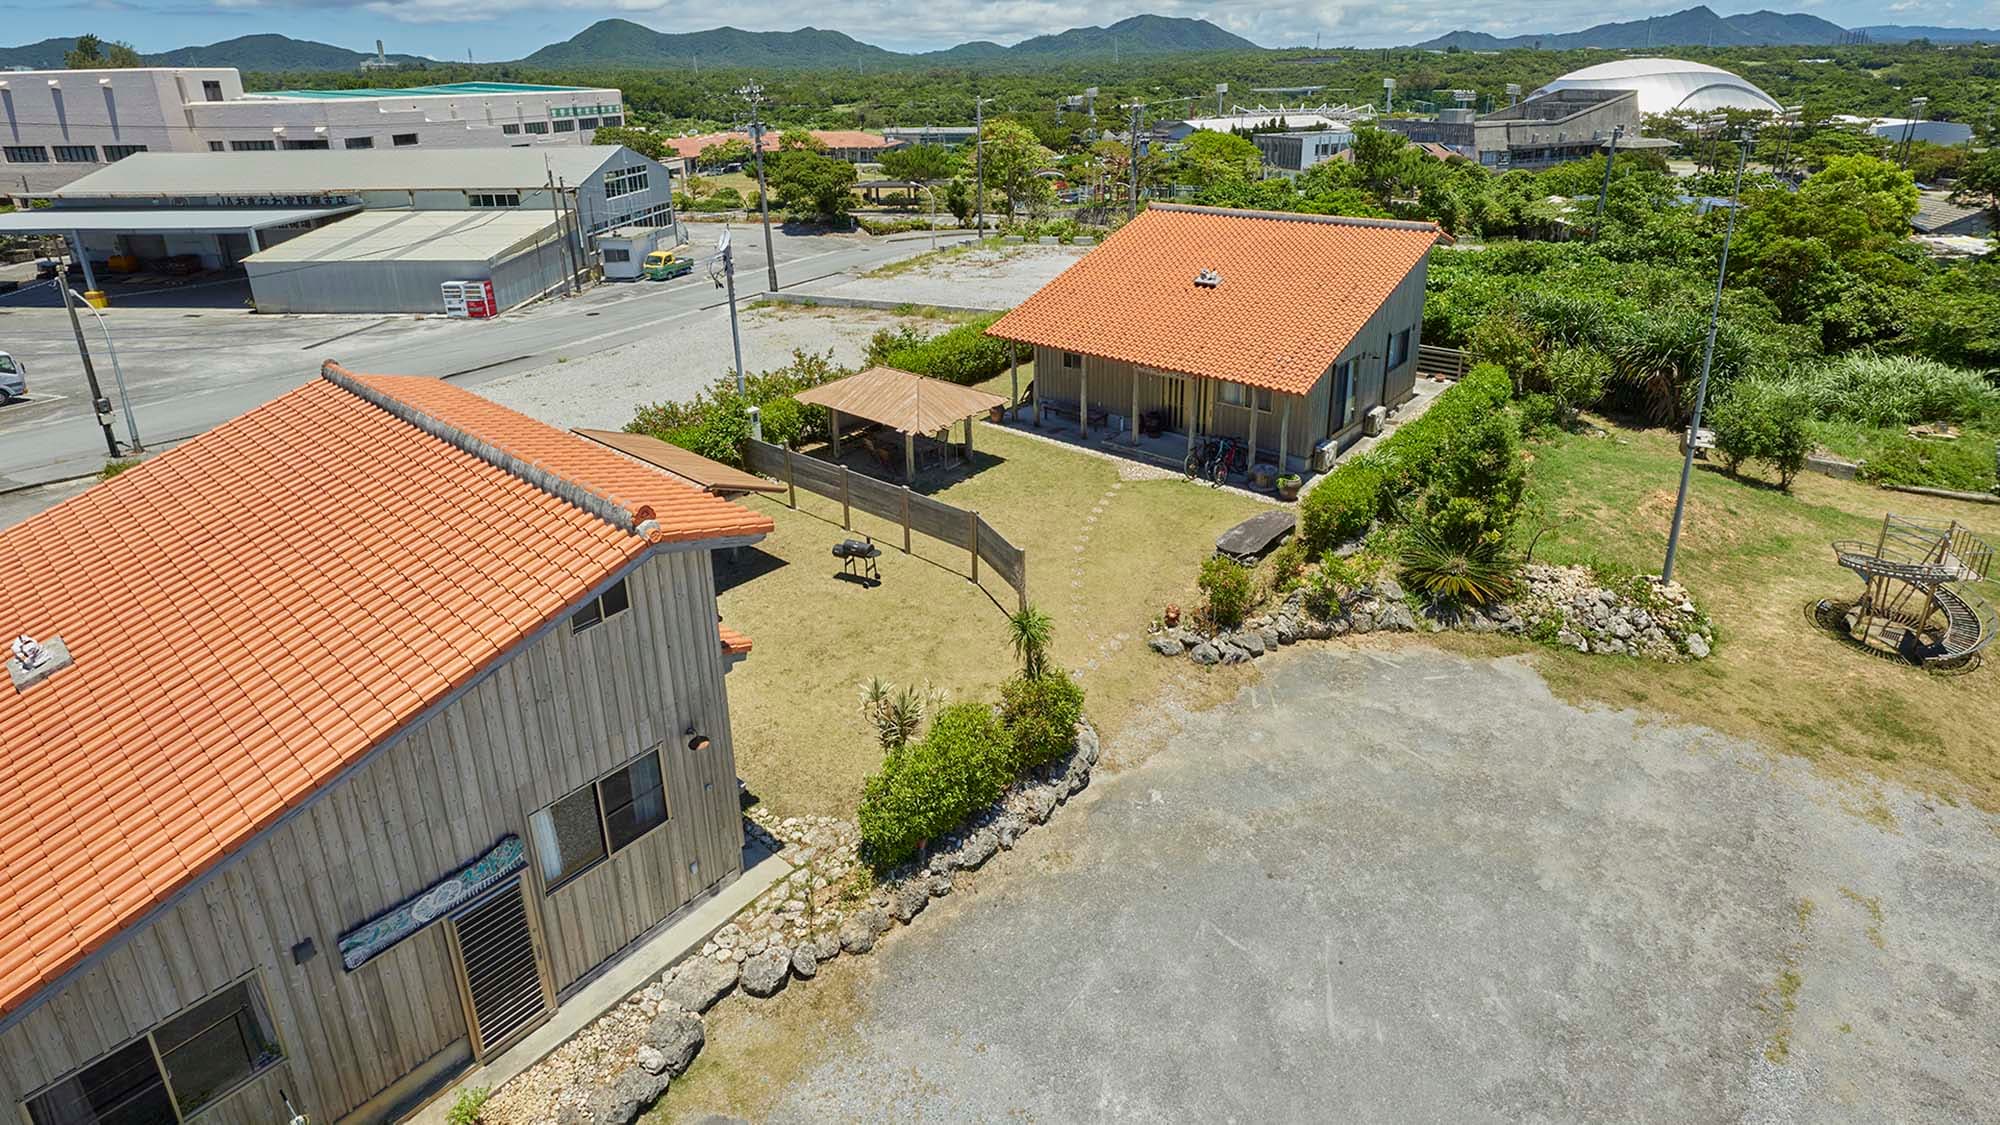 ・[Appearance] A pension with an Okinawa-themed wooden building with red tiles for rent.